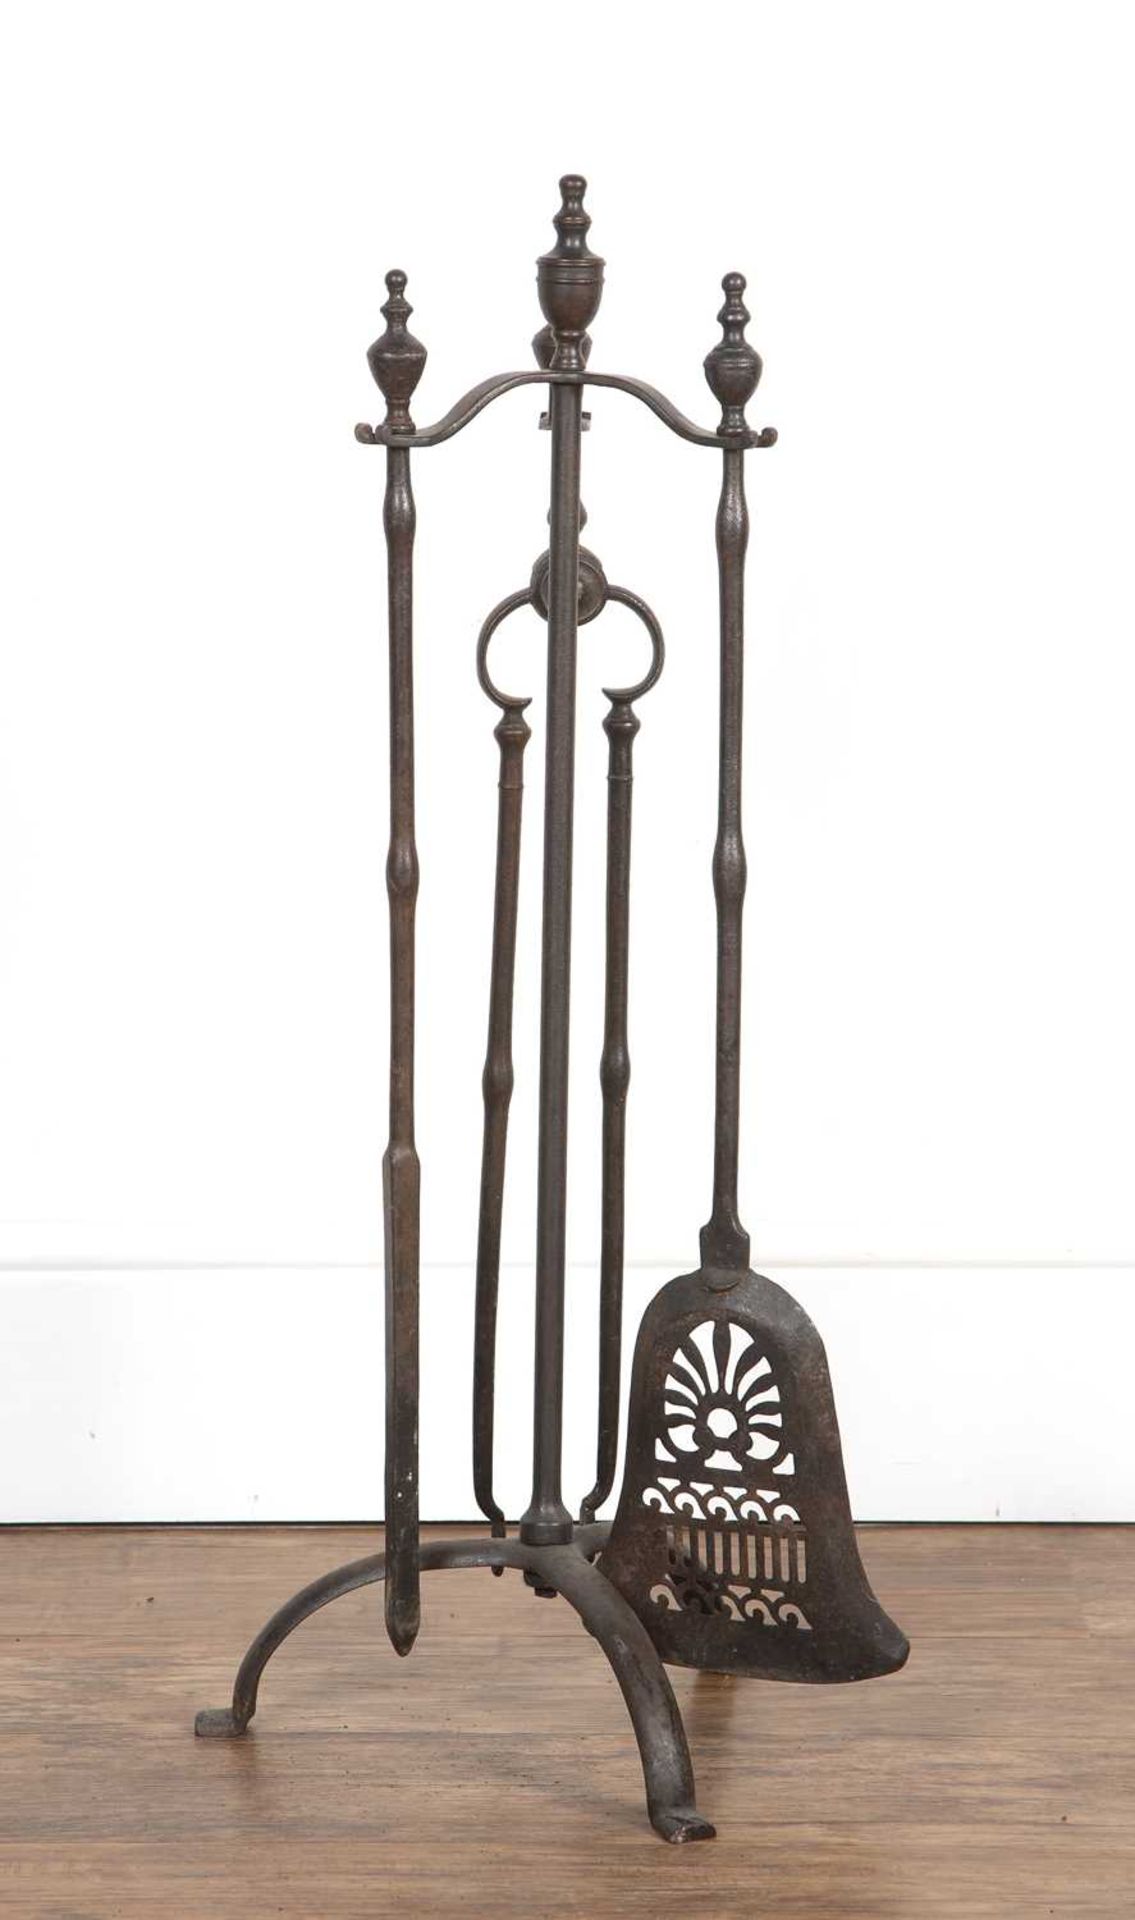 Fireplace companion set 20th Century, iron, the stand on tripod base, 78cm high overall Overall - Bild 2 aus 2